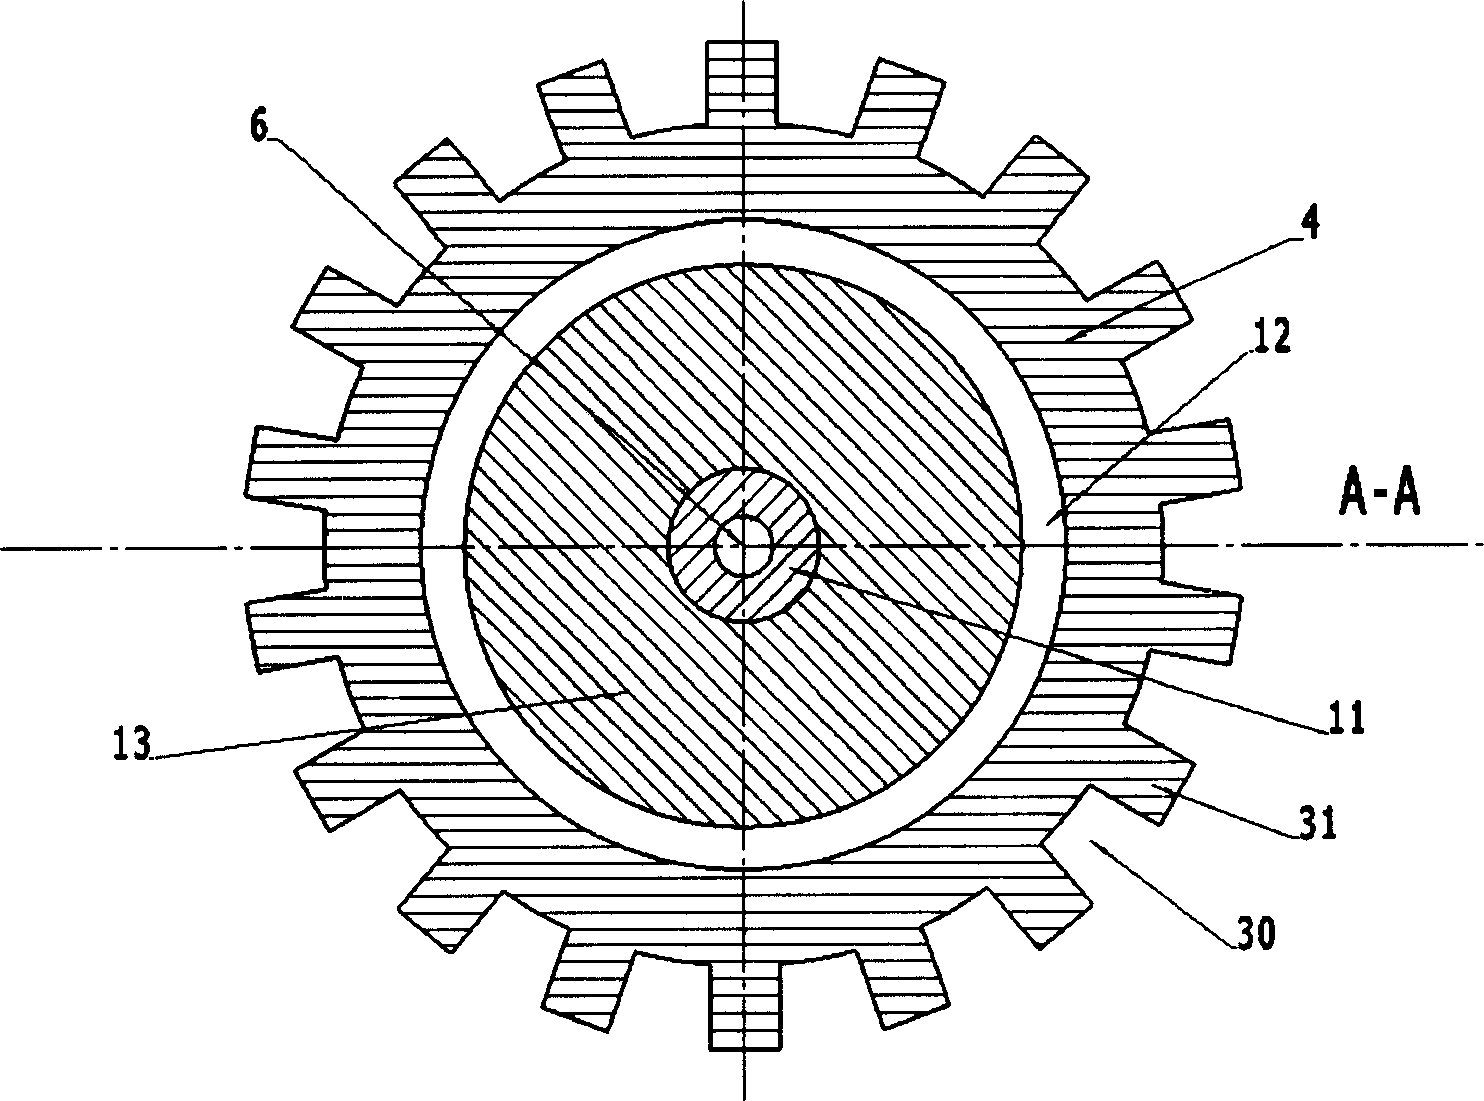 Wound internal rotor of double mechanical port electric machine